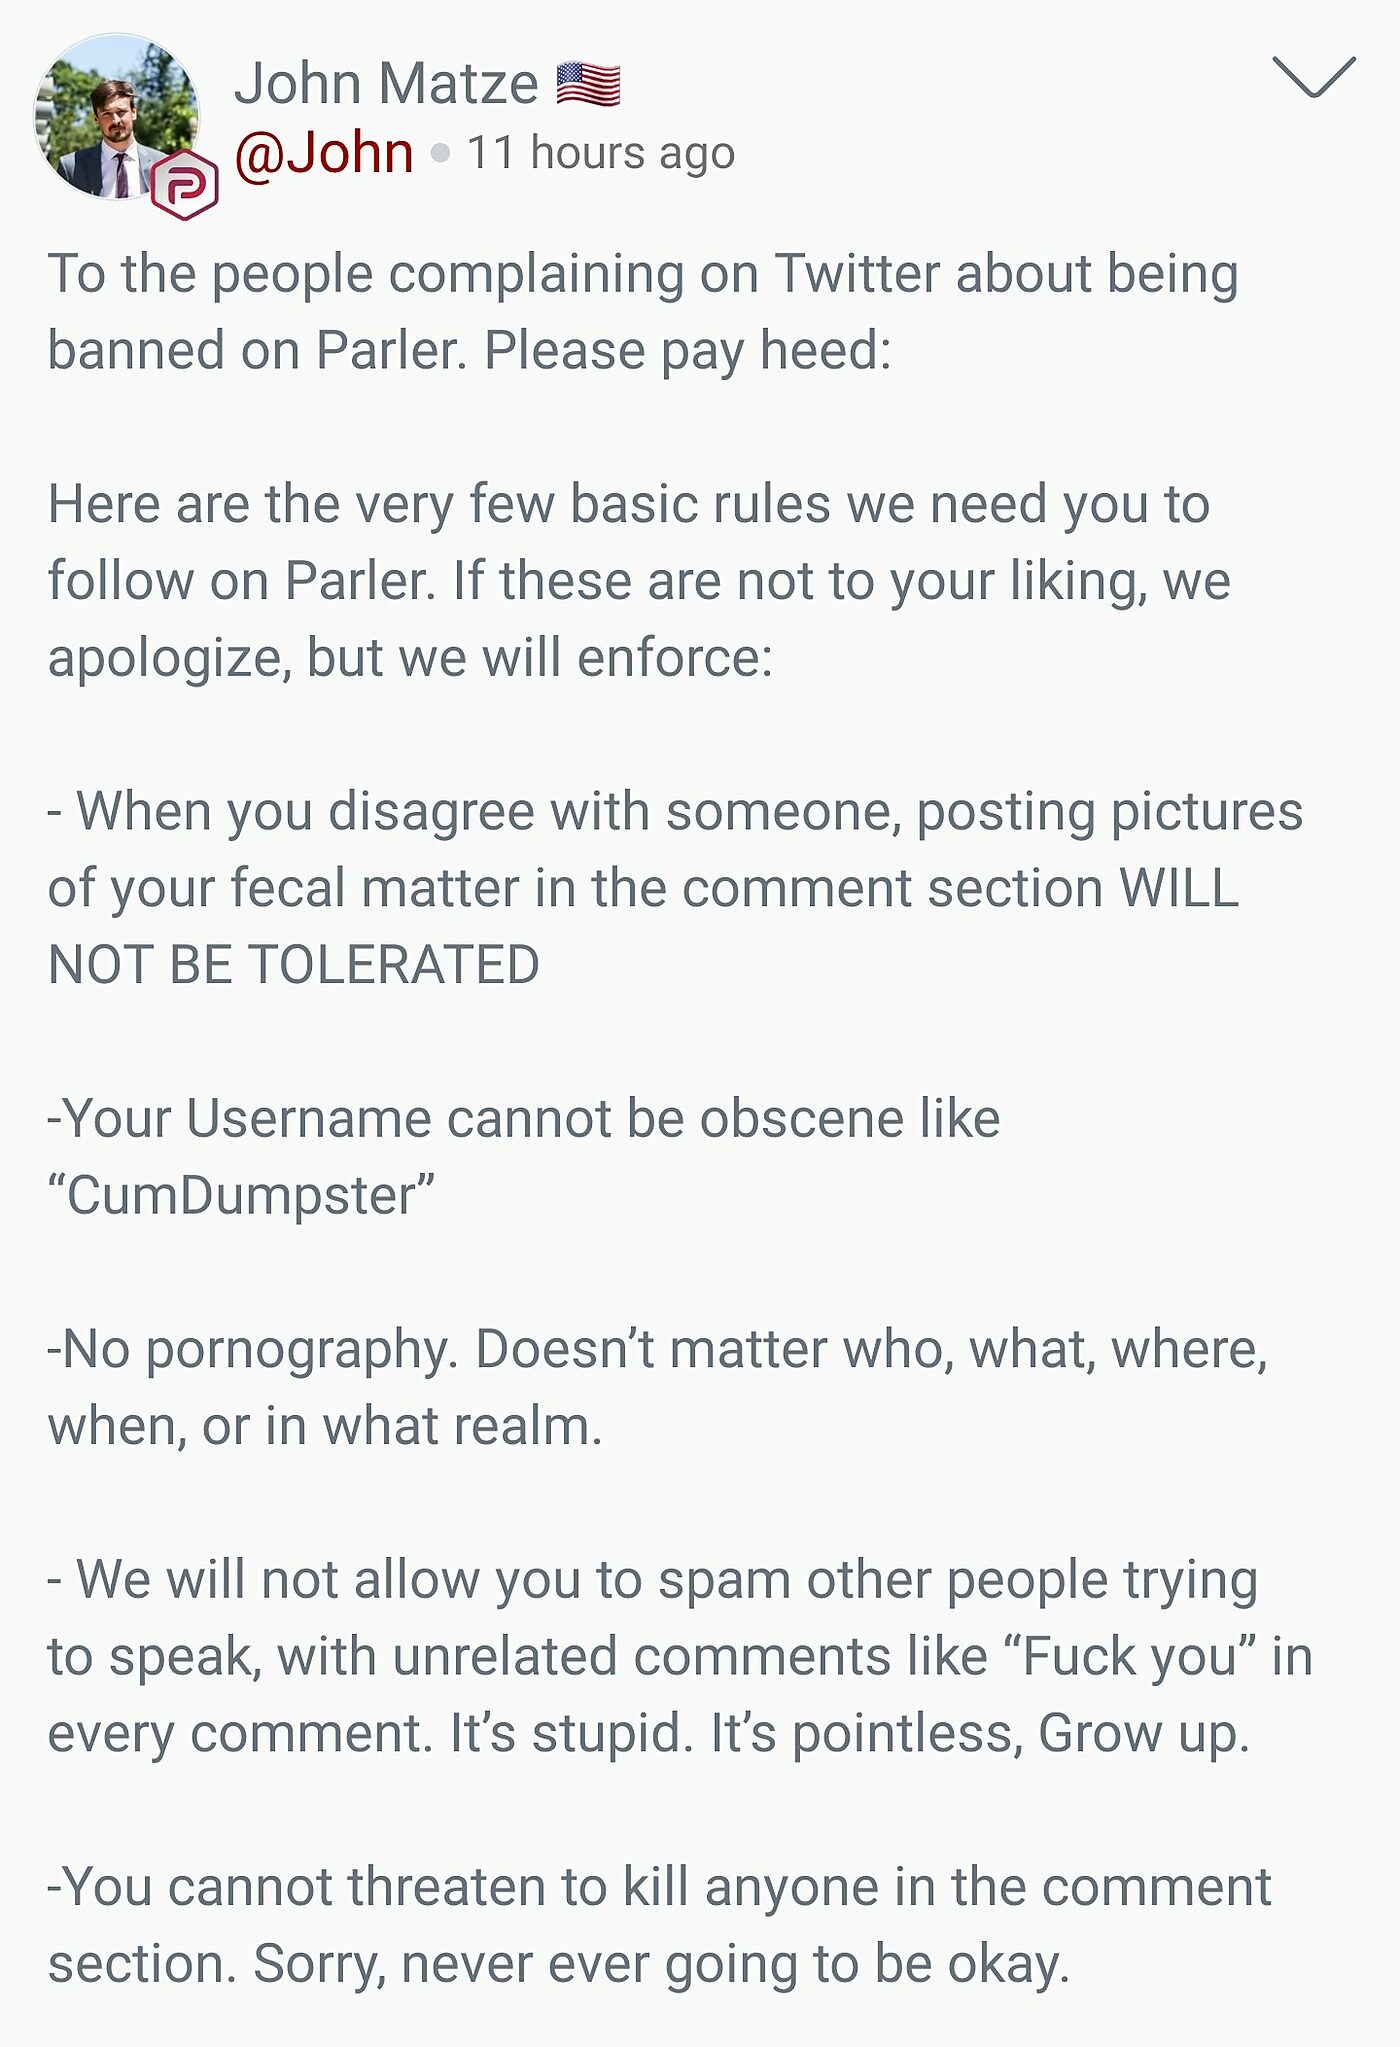 Rules posted by Parler's John Matze